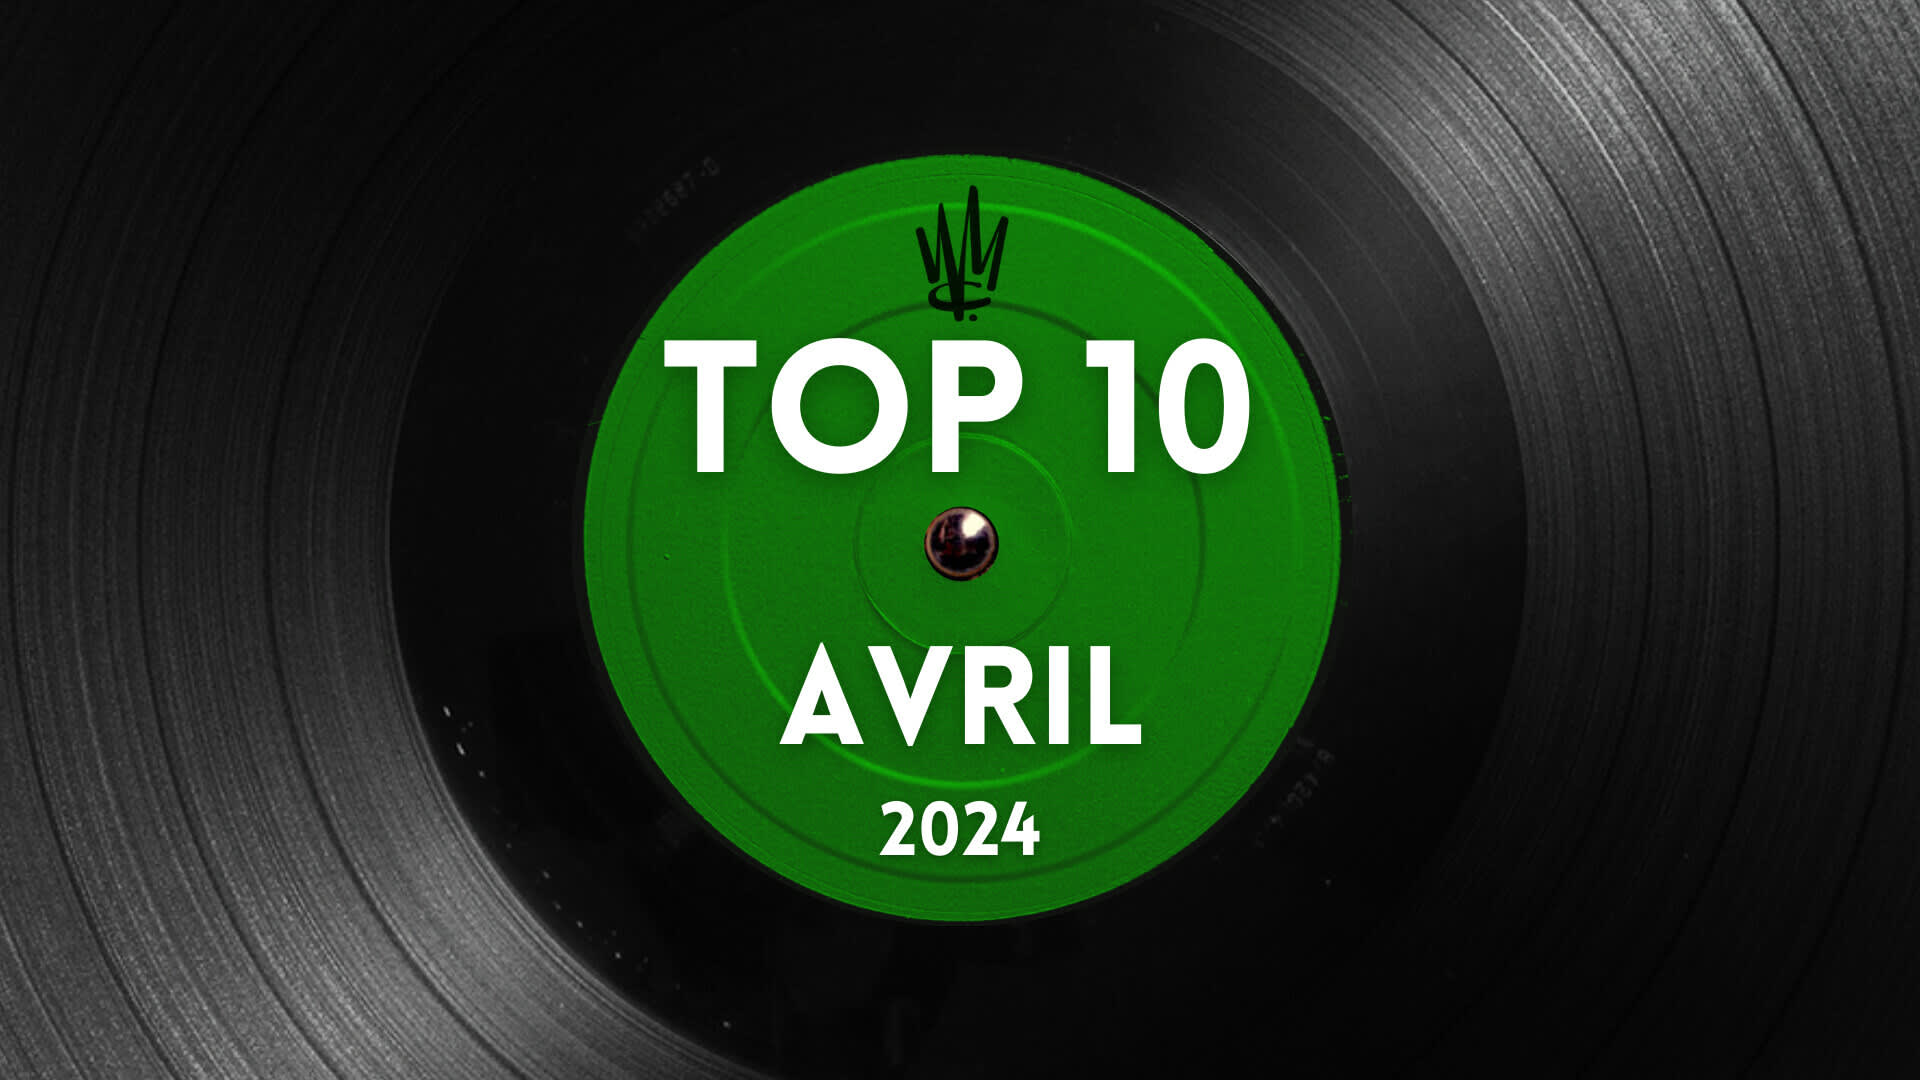 TOP 10 AVRIL 2024